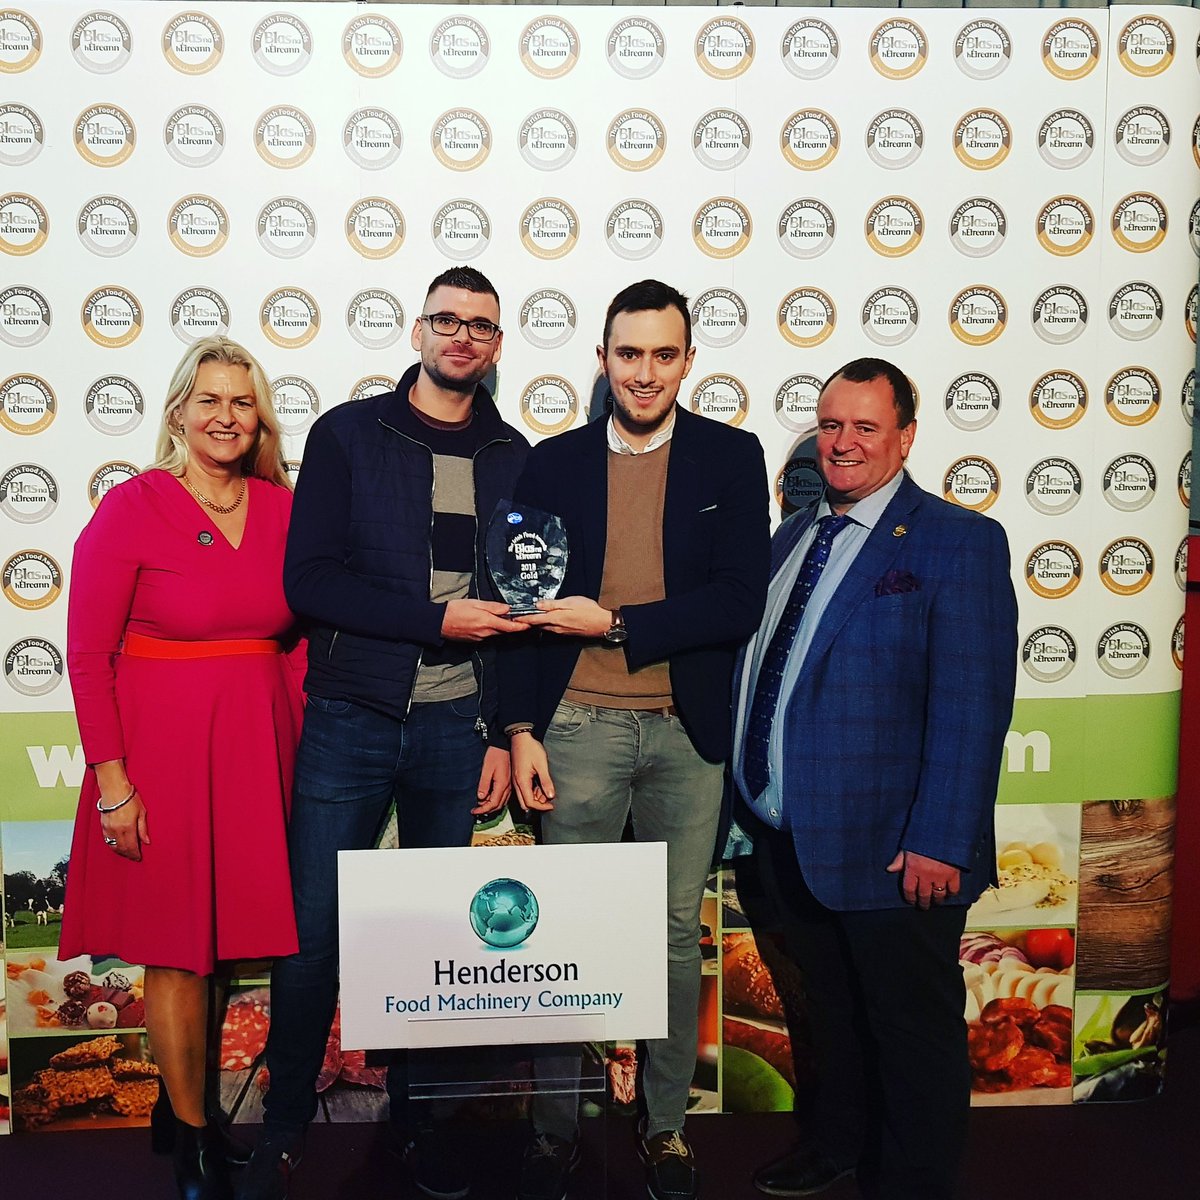 And we've won GOLD at the @BlasNahEireann awards in dingle for our Ballyvourney White Pudding 👌#blas18 #Blas2018 #growwithaldi